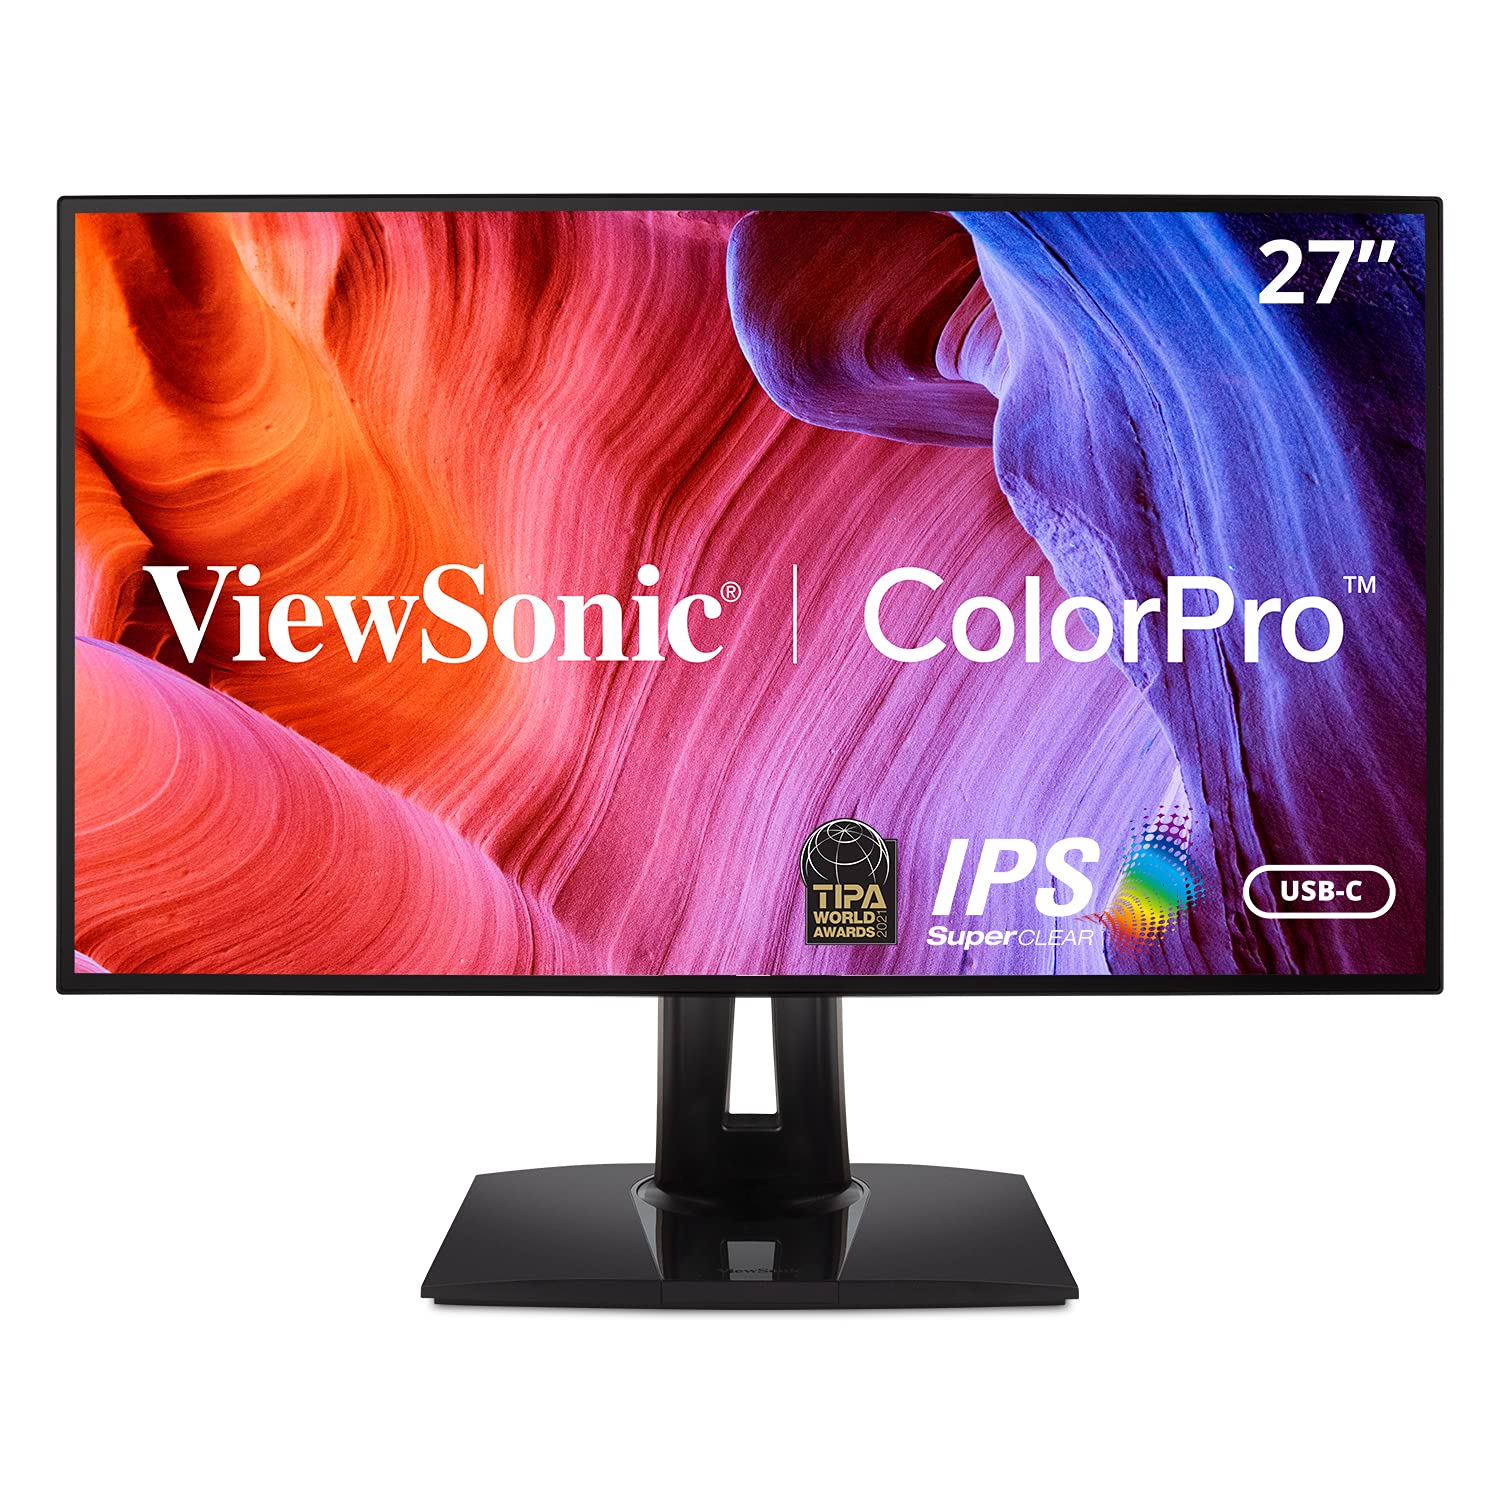 ViewSonic VP2768a 27-Inch Premium IPS 1440p Monitor with Advanced Ergonomics, ColorPro 100% SRGB Rec 709, 14-Bit 3D LUT, Eye Care, 90W USB C, RJ45, HDMI, Daisy Chain for Home and Office,Black